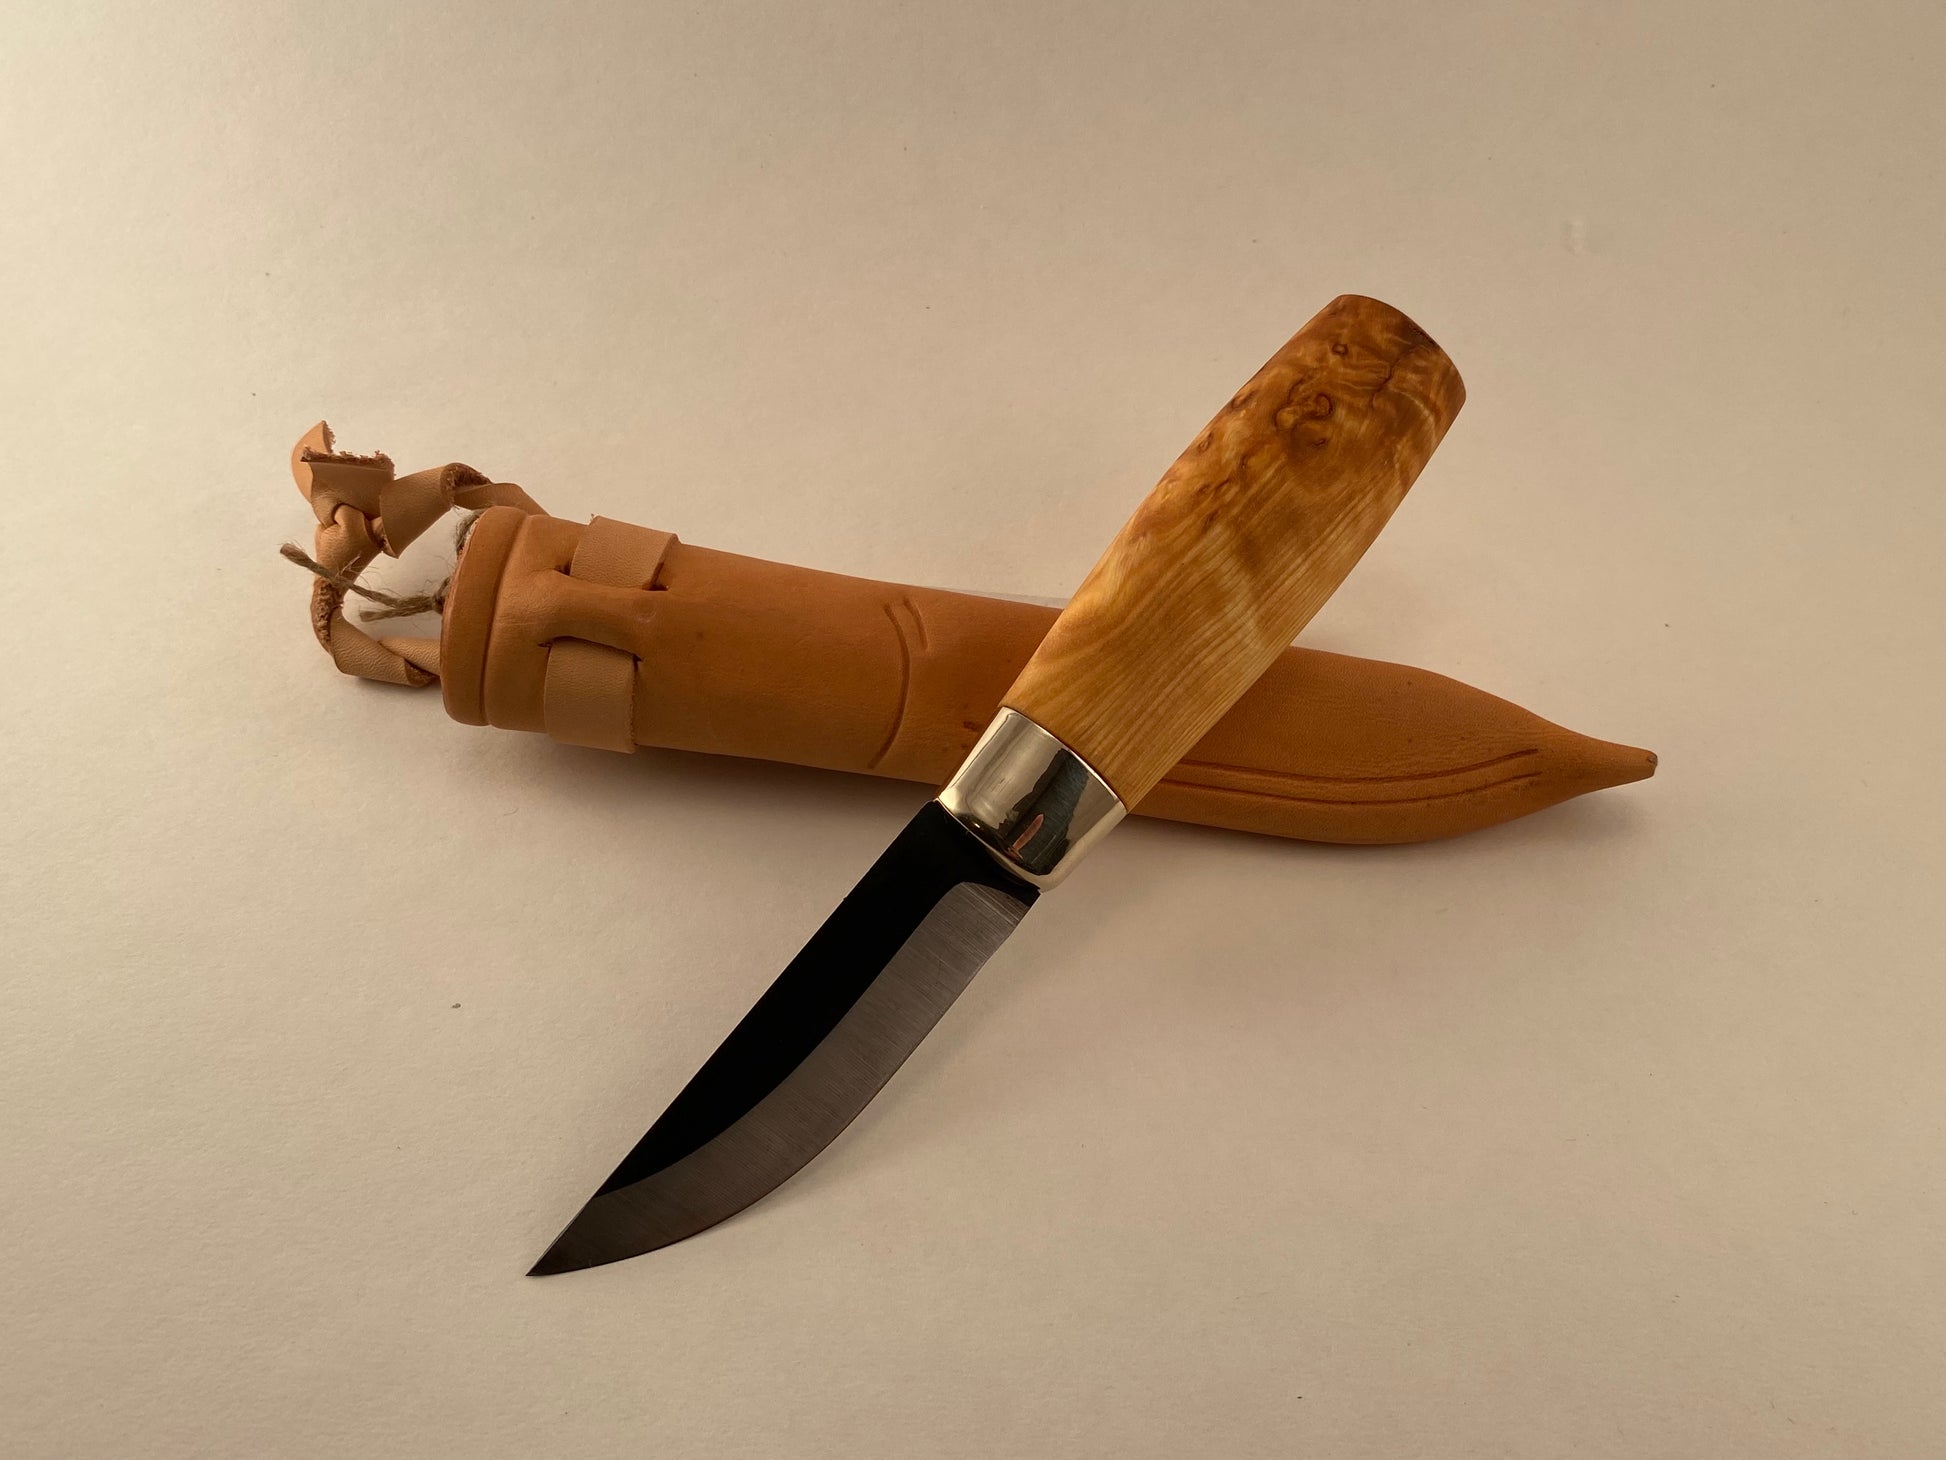 Classic Hunting Knife With Wood Handle